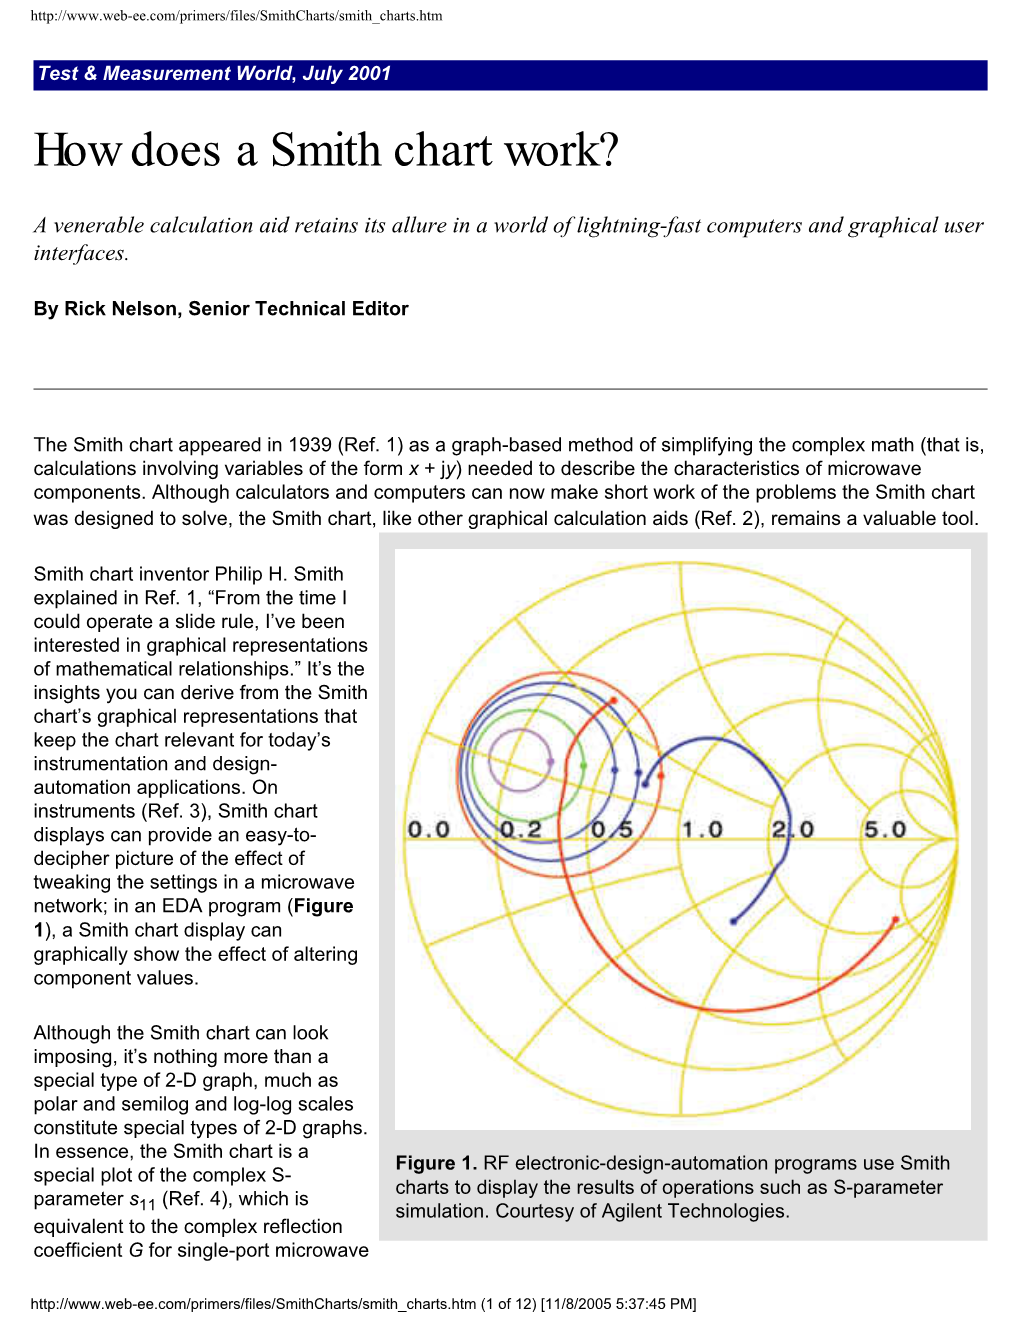 How Does a Smith Chart Work?